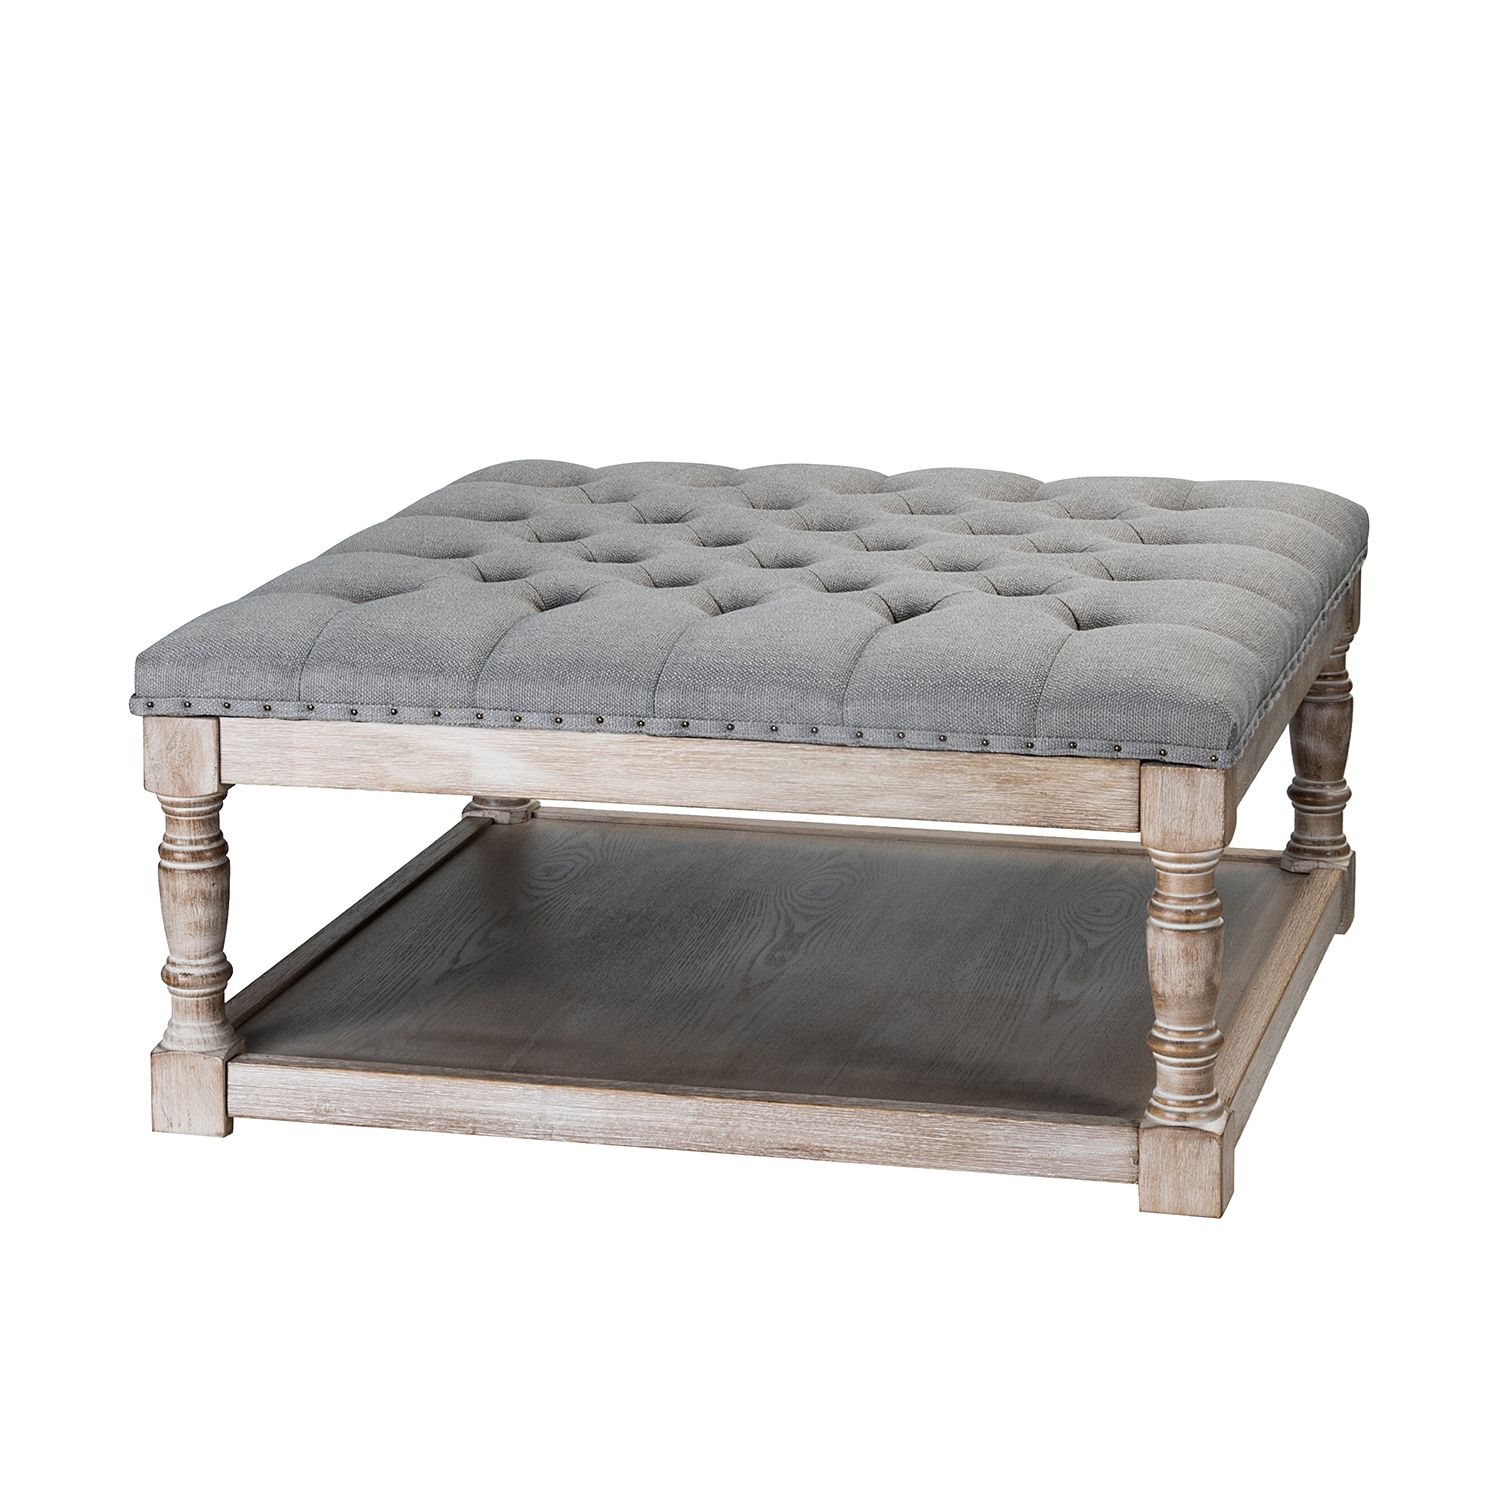 Latest 14 Karat Home Tufted Cocktail Ottoman Wooden With Storage Shelf, Square  Upholstered Ottoman Coffee Table, Grey – Walmart For Beige Thomas Ottomans (View 6 of 15)